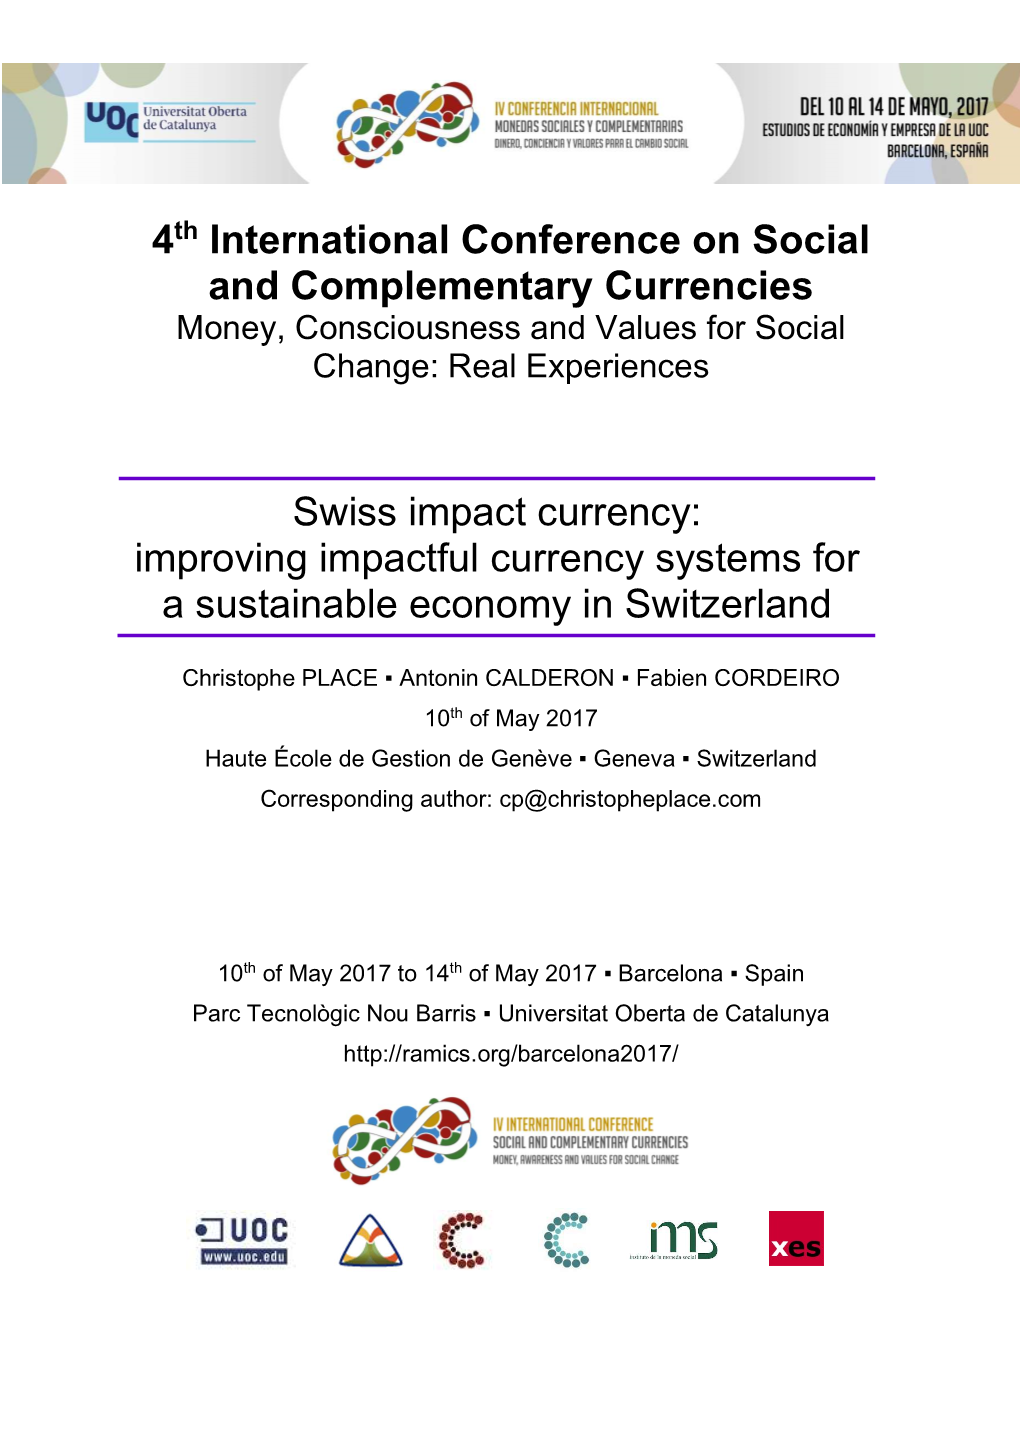 Improving Impactful Currency Systems for a Sustainable Economy in Switzerland